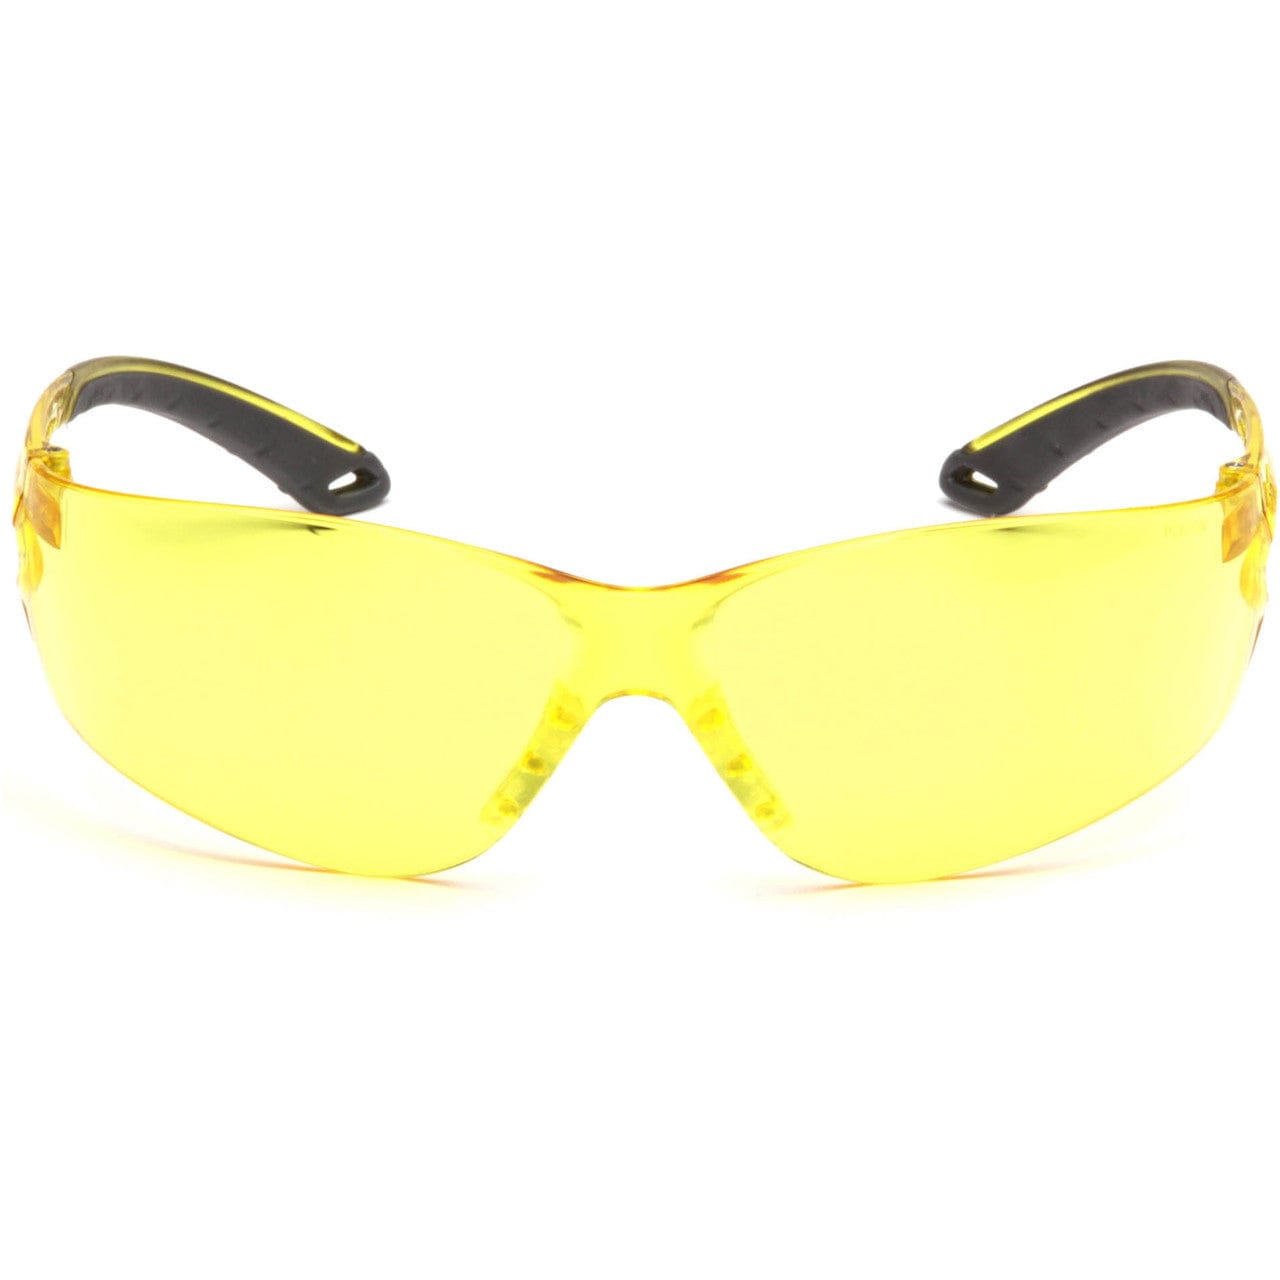 Pyramex Itek Safety Glasses with Amber Lens S5830S Front View